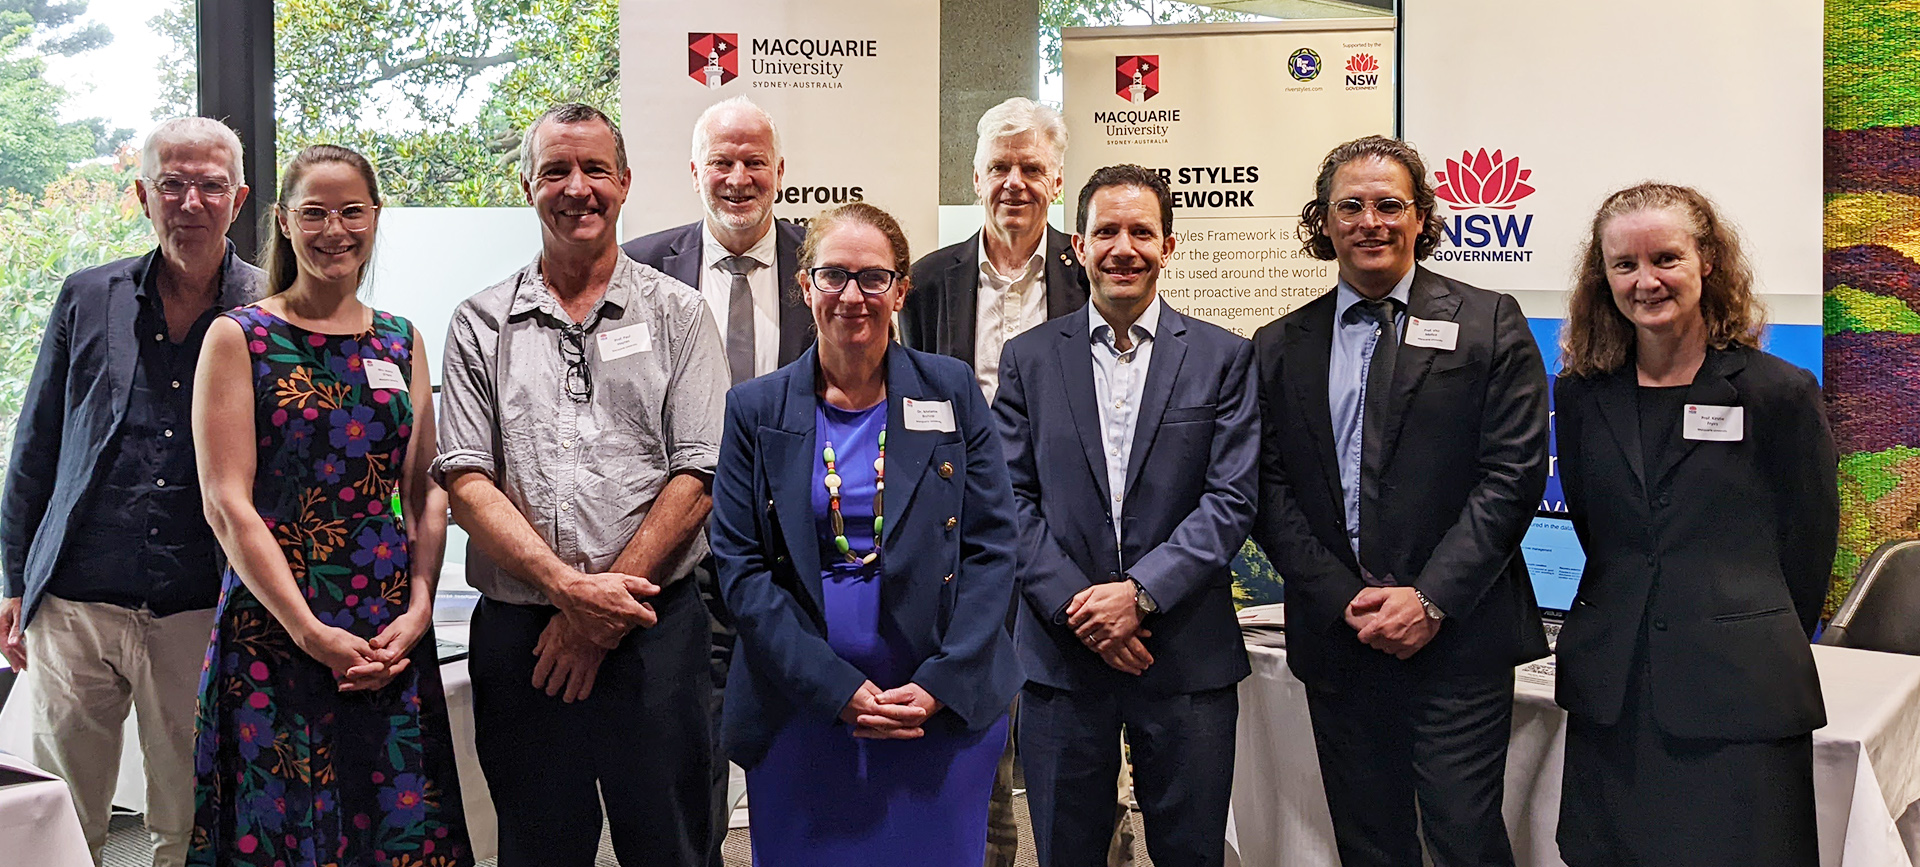 Pictured: The Macquarie staff who attended the Showcase L-R: Prof David Raftos, Ms Jessica O'Hare, Prof Paul Haynes, Prof Tom Smith, Assoc Prof Melanie Bishop, Prof Michael Aitken, Prof Andrew Lepone, Prof Vito Mollica, Prof Kirstie Fryirs